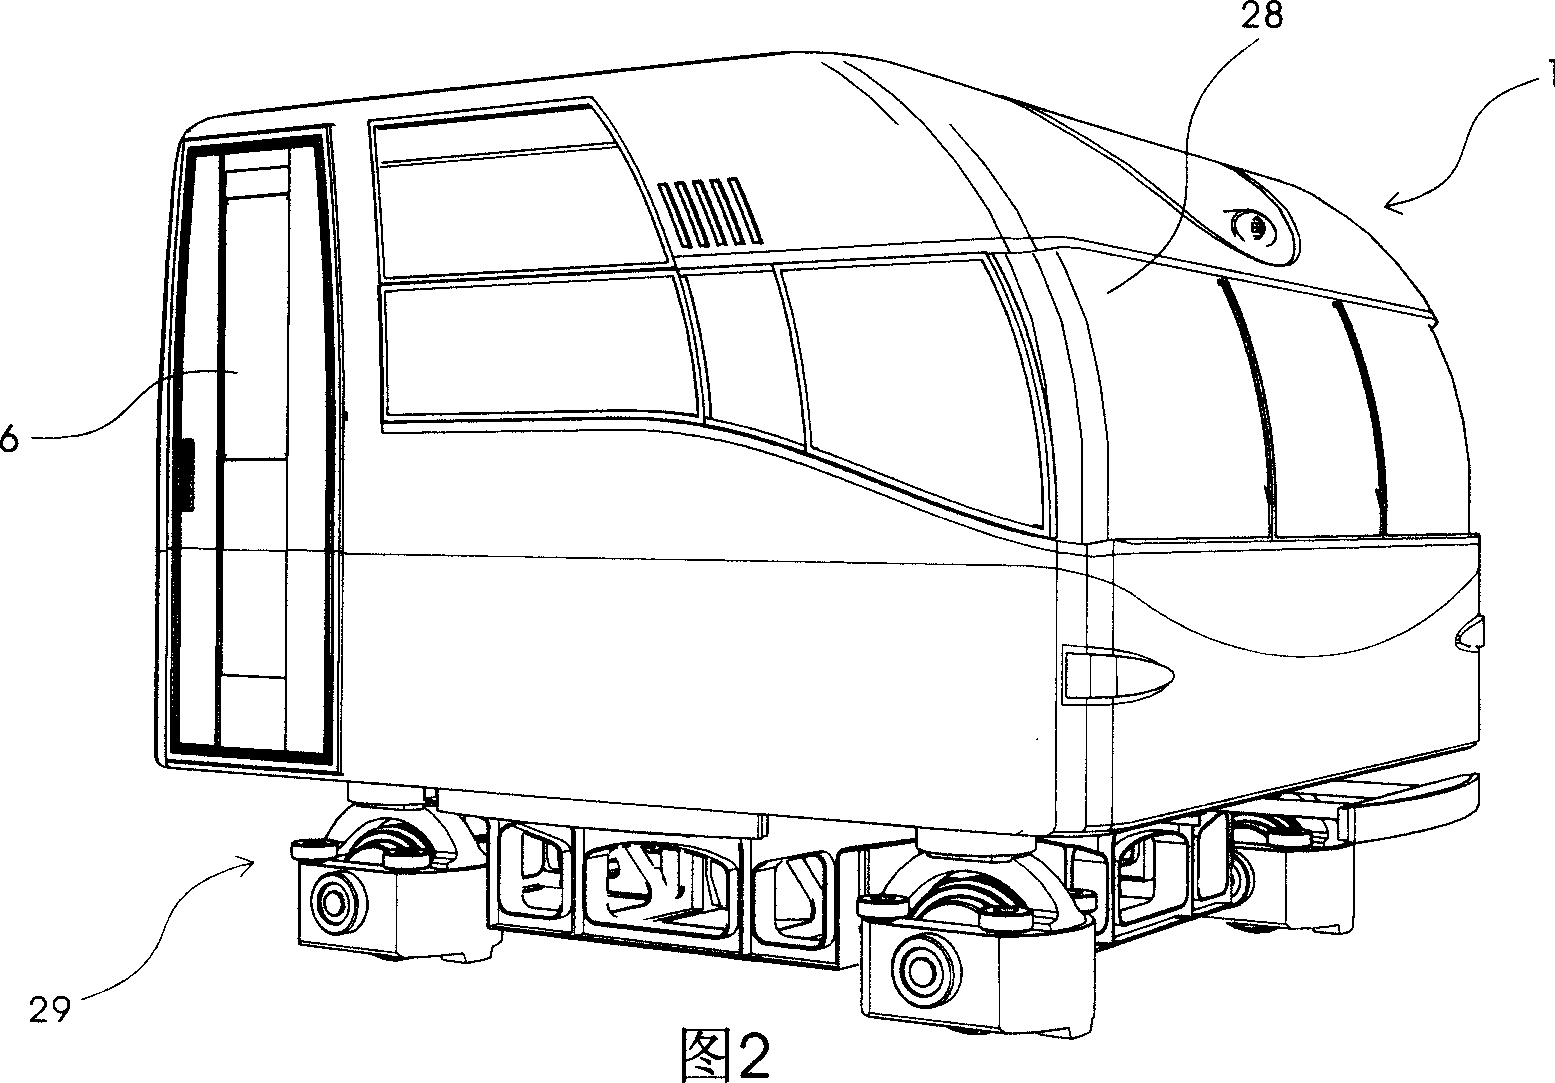 Structure of carriage for automatic railcar